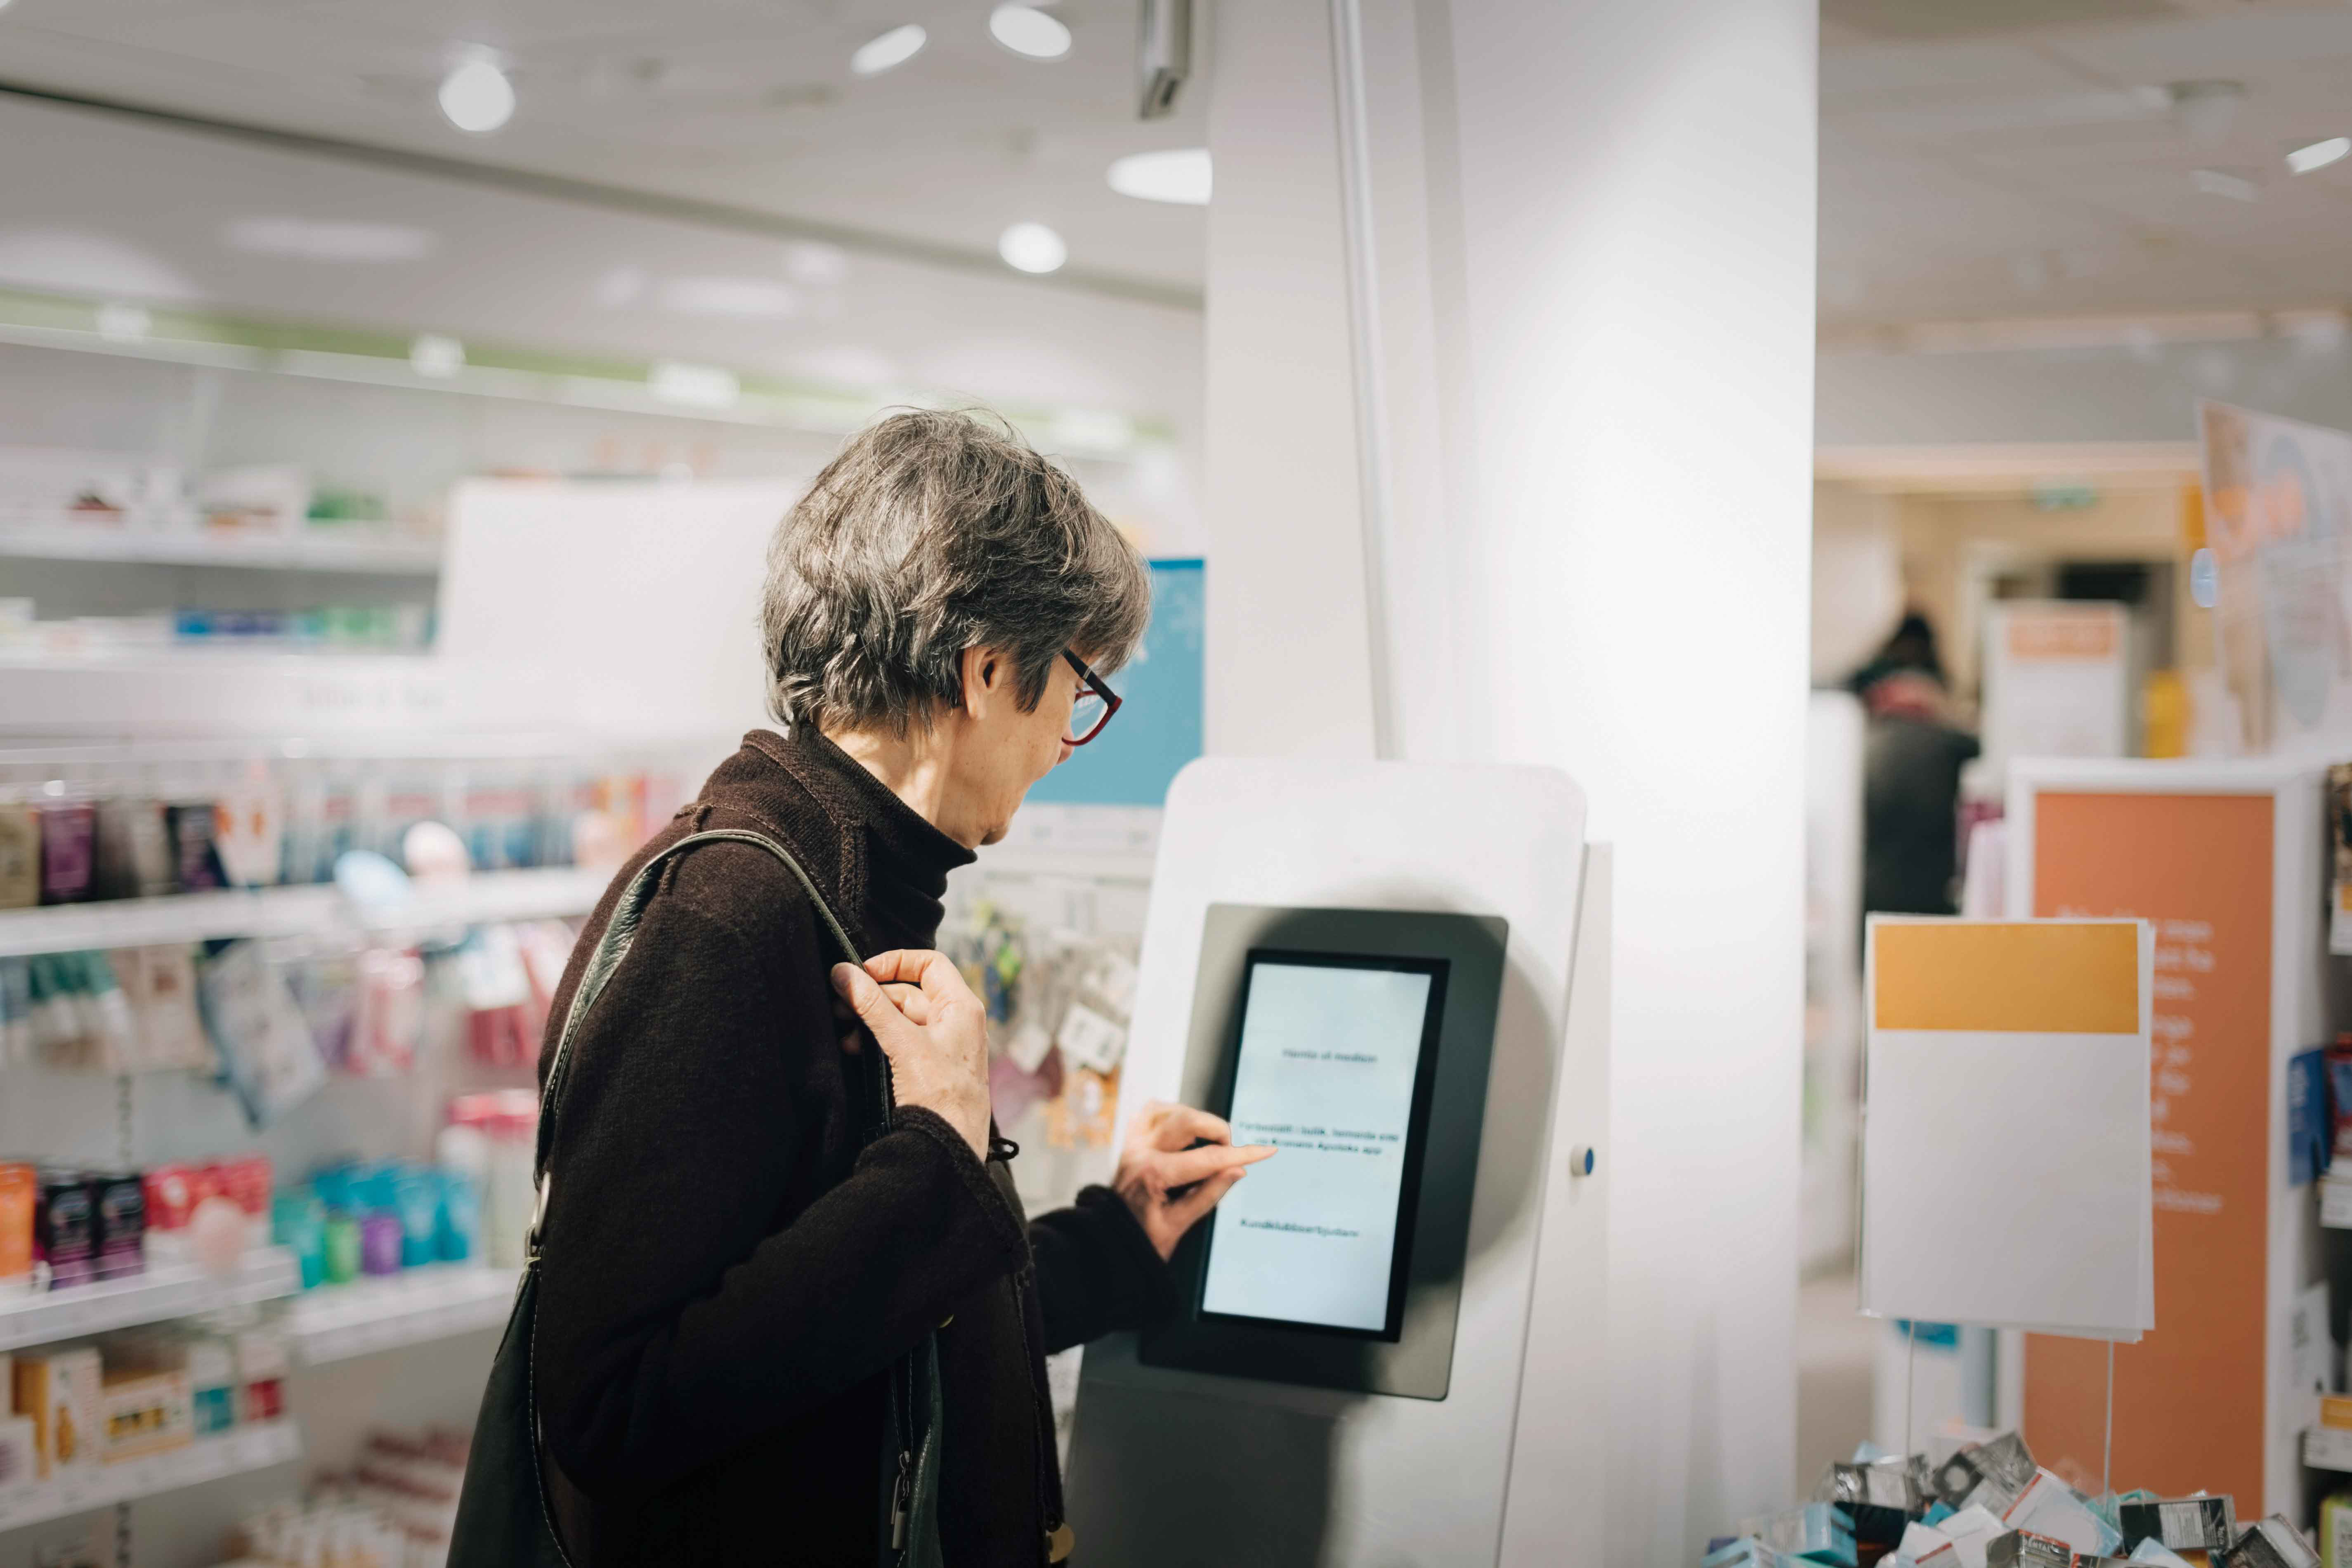 Picture of an older woman in a store shopping on a kiosk